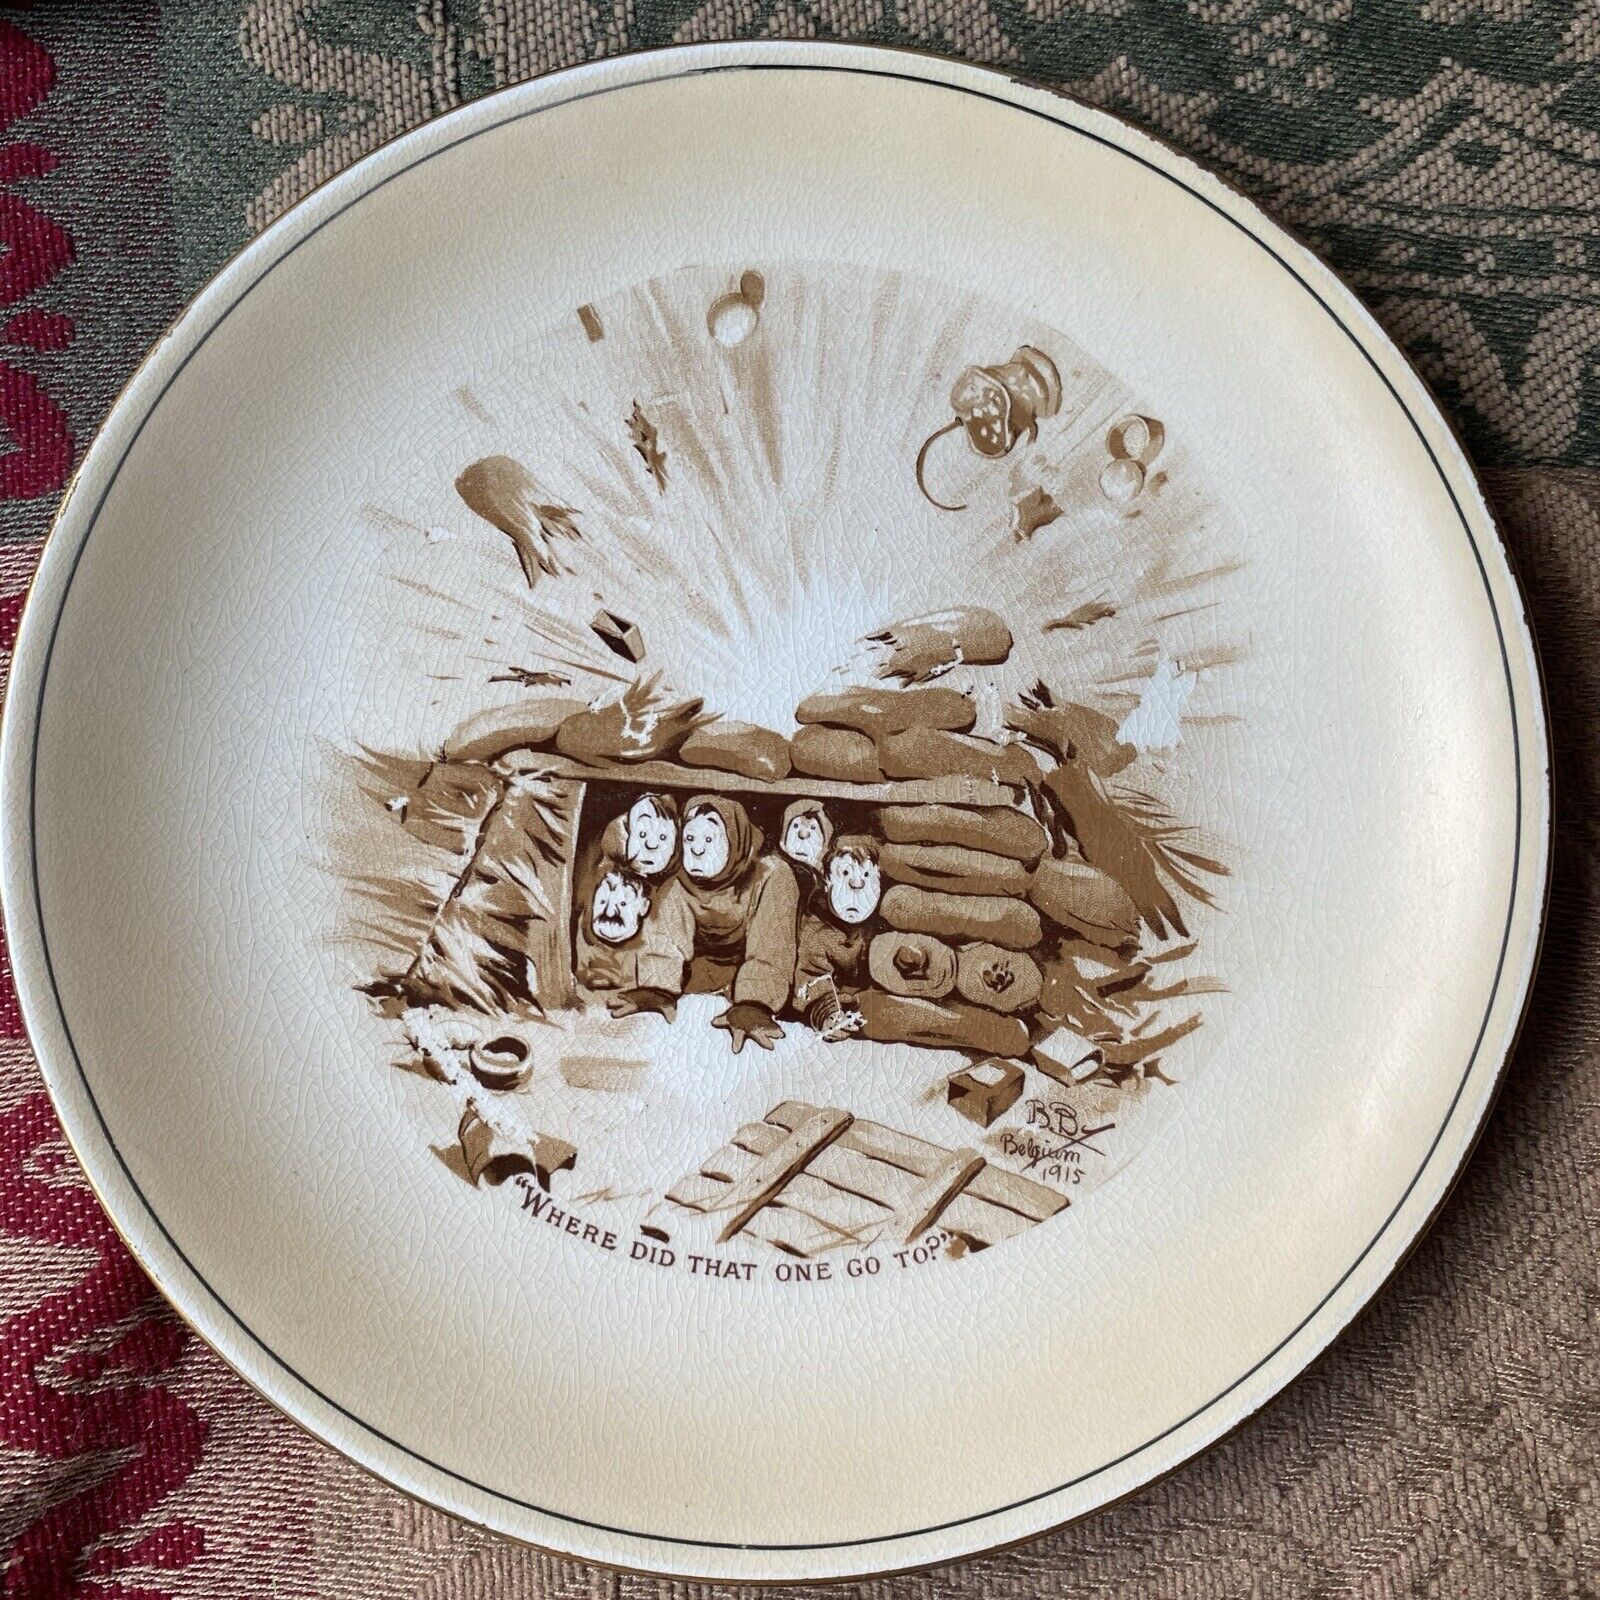 Grimwades WWI Bruce Bairnsfather Plate - Collectable China Display Plate